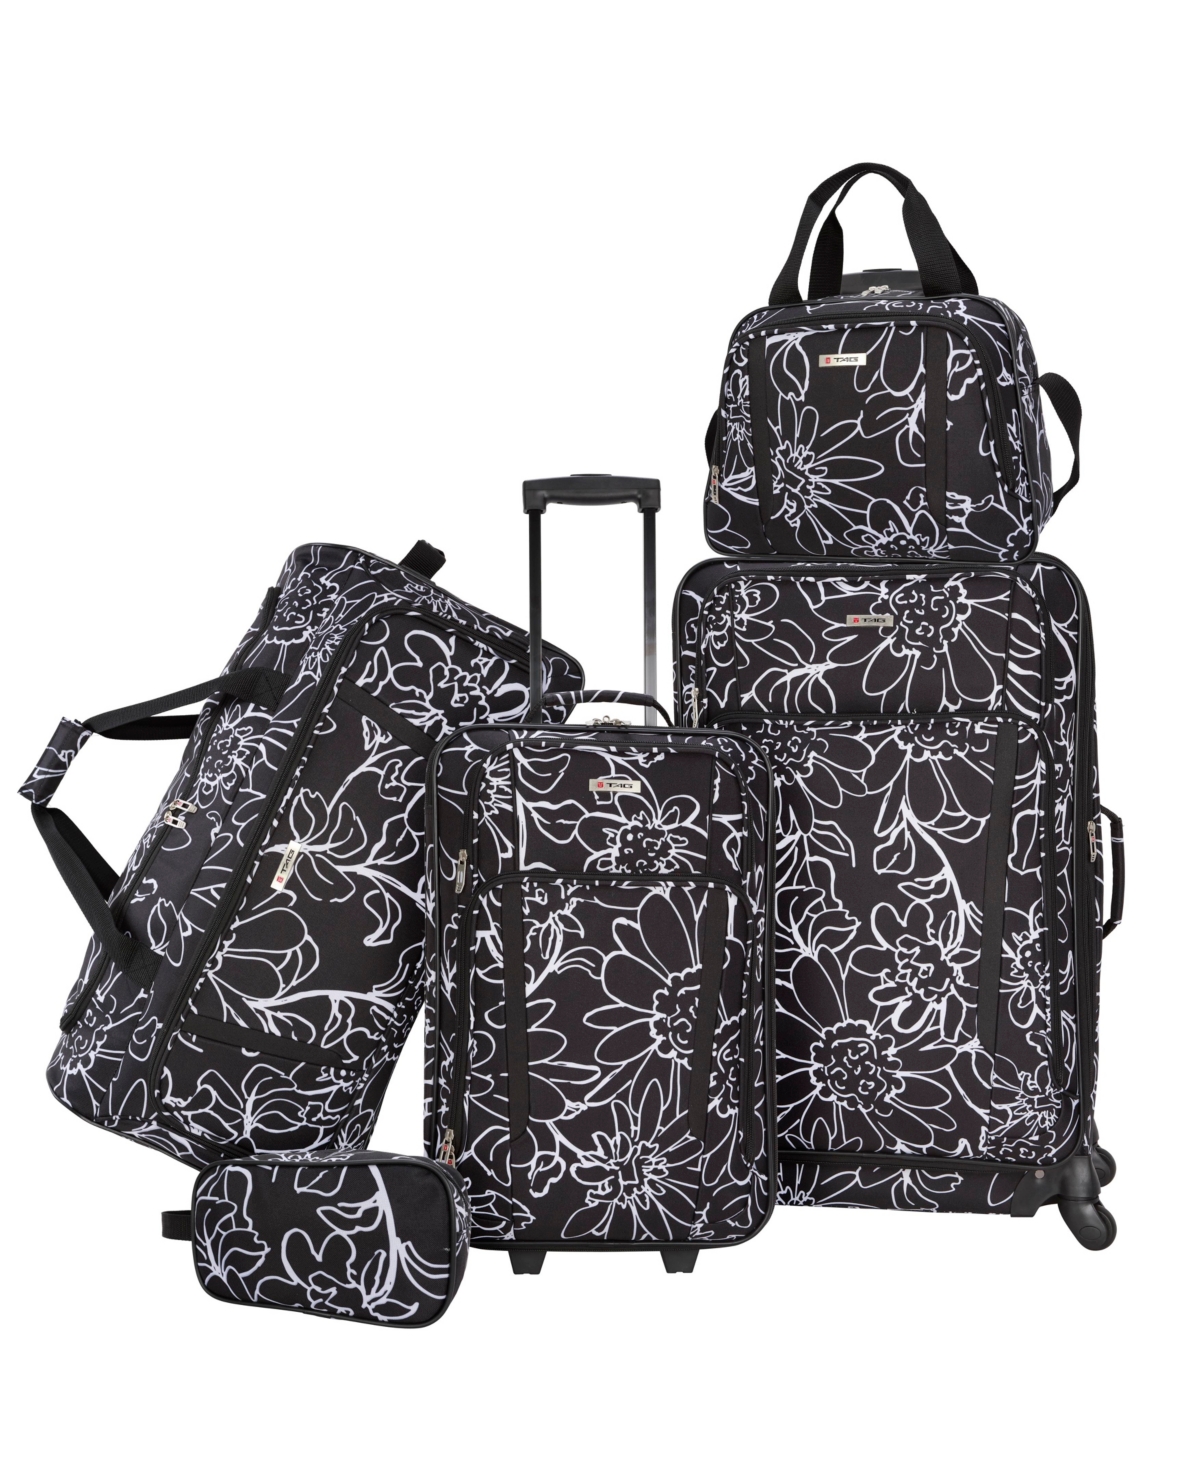 Freehold 5-Piece Softside Spinner Luggage Set - Illustrated Floral